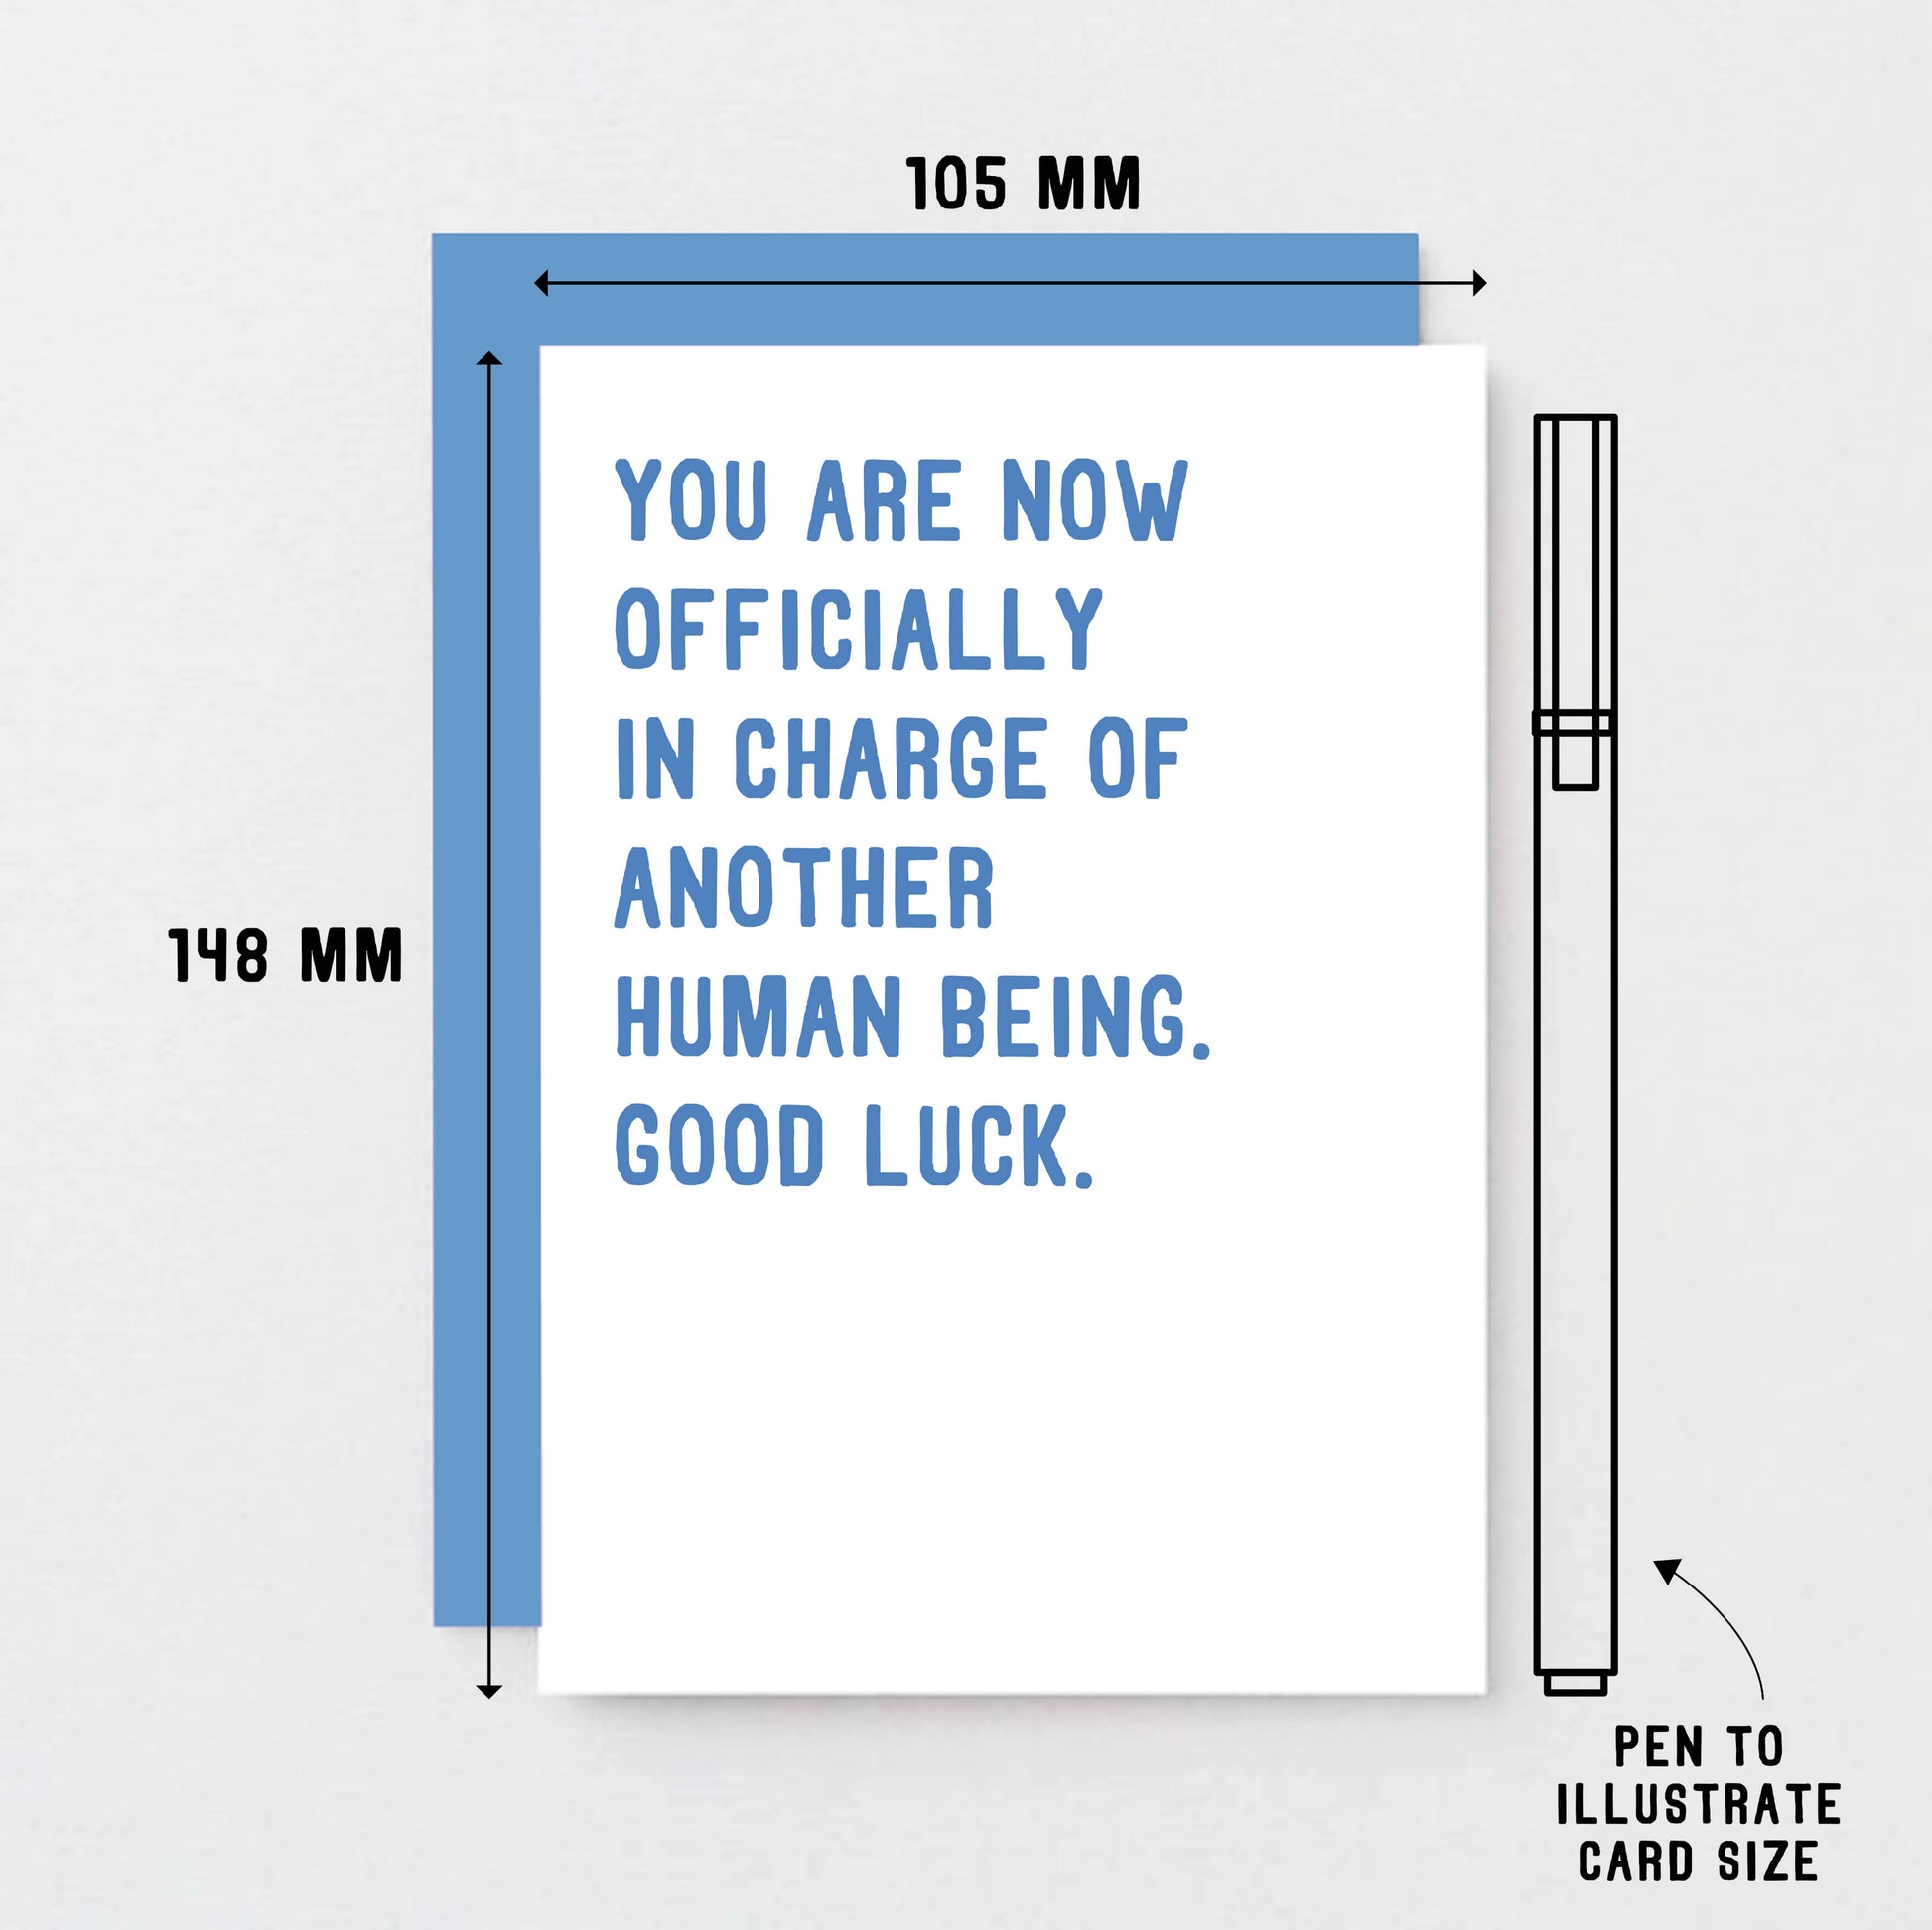 New Baby Card by SixElevenCreations. Reads You are now officially in charge of another human being. Good luck. Product Code SE2008A6